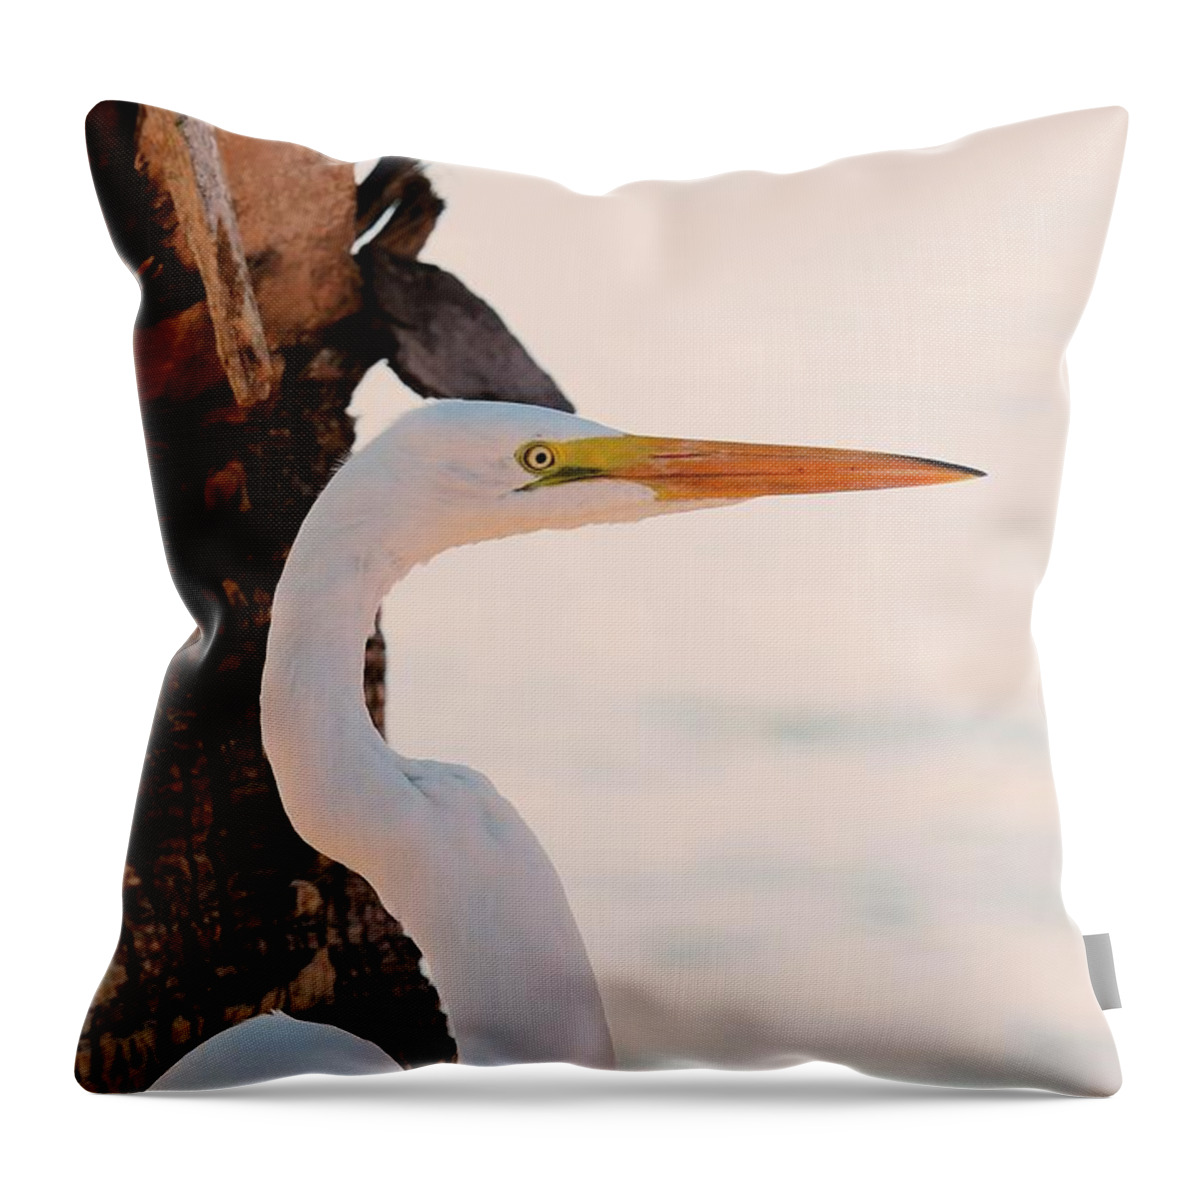 Great White Egret Throw Pillow featuring the photograph Great White Egret Standing by a Cabbage Palm Tree by Joanne Carey